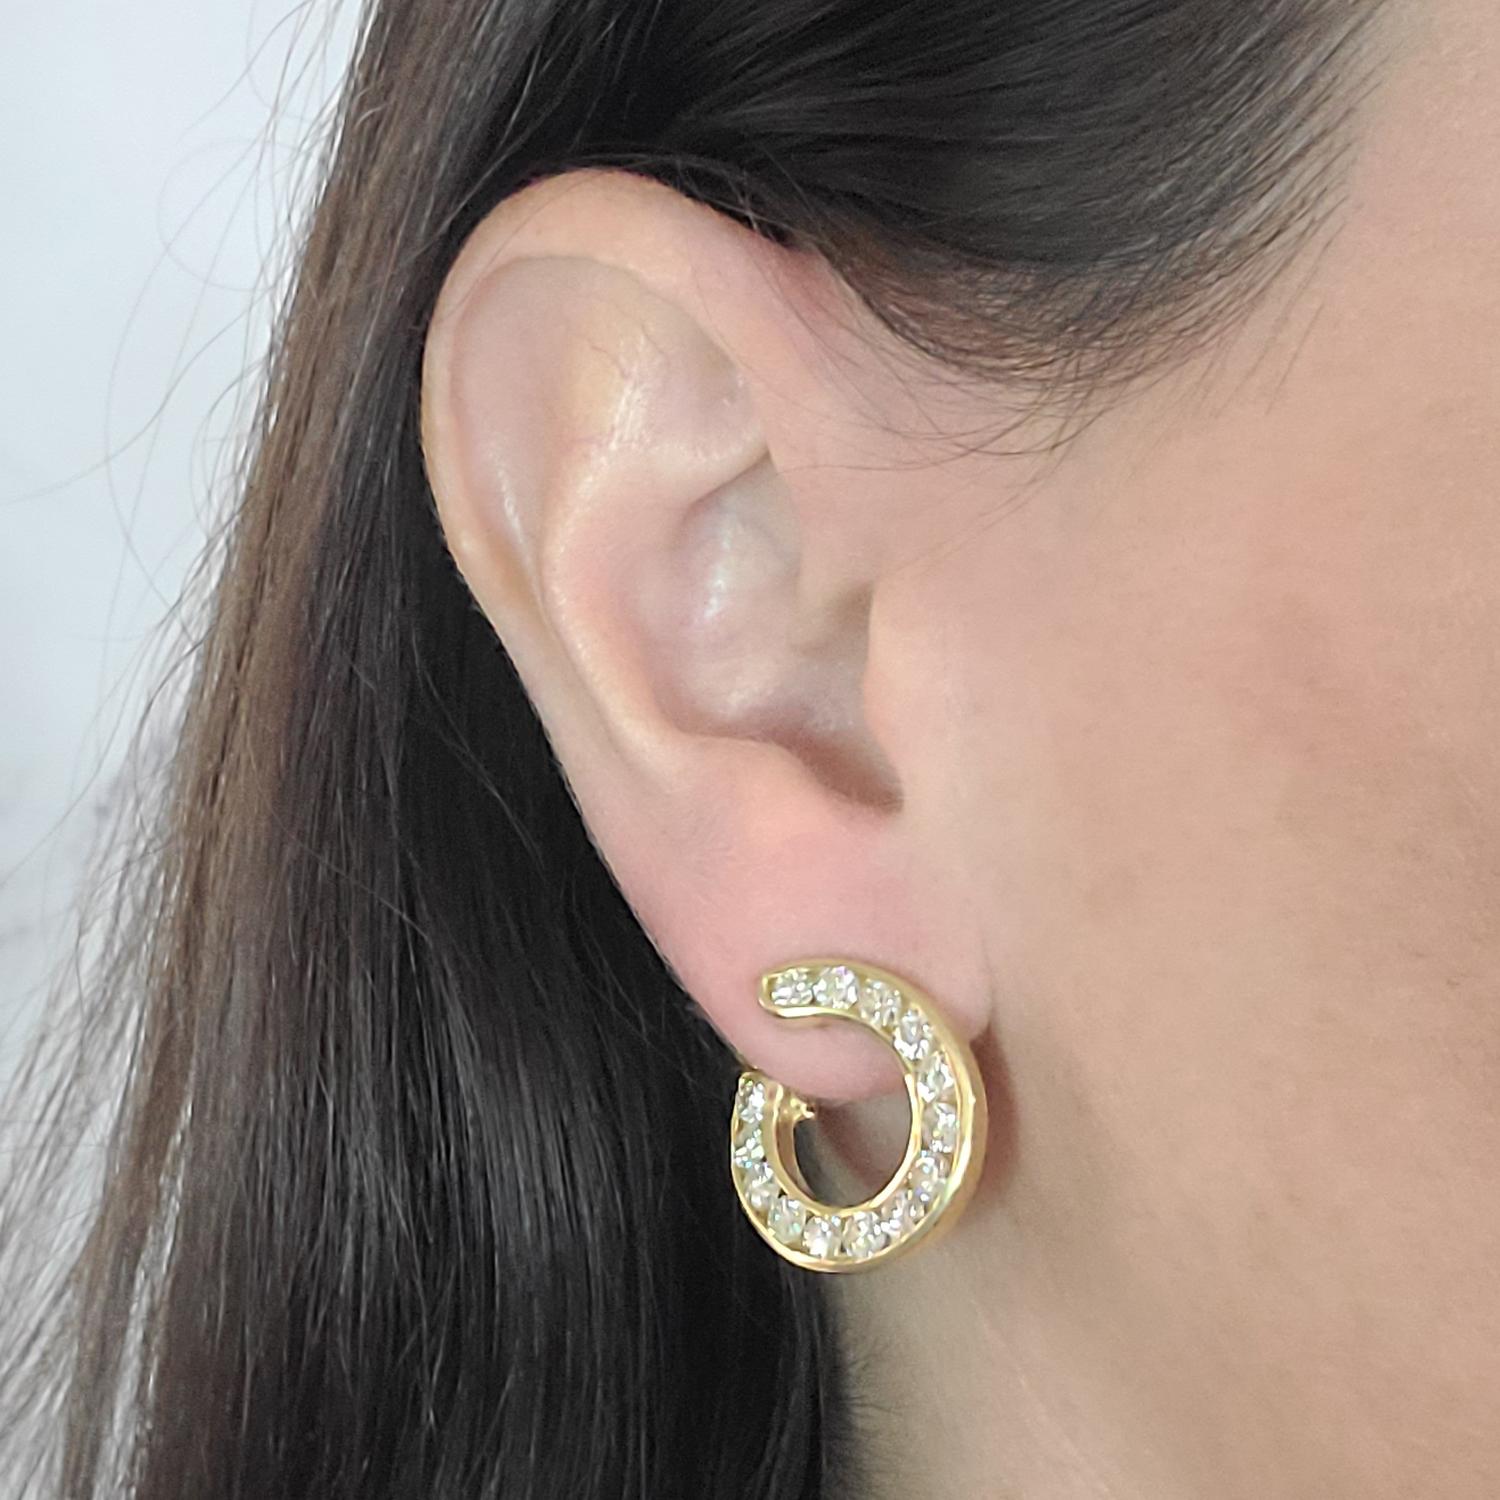 18 Karat Yellow Gold Forward Facing Circle Swirl Earrings Featuring 28 Channel Set Round Brilliant Cut Diamonds of VS Clarity and H Color Totaling Approximately 3.00 Carats. Front to Back Design with Pierced Post with Supportive Omega Clip Back;